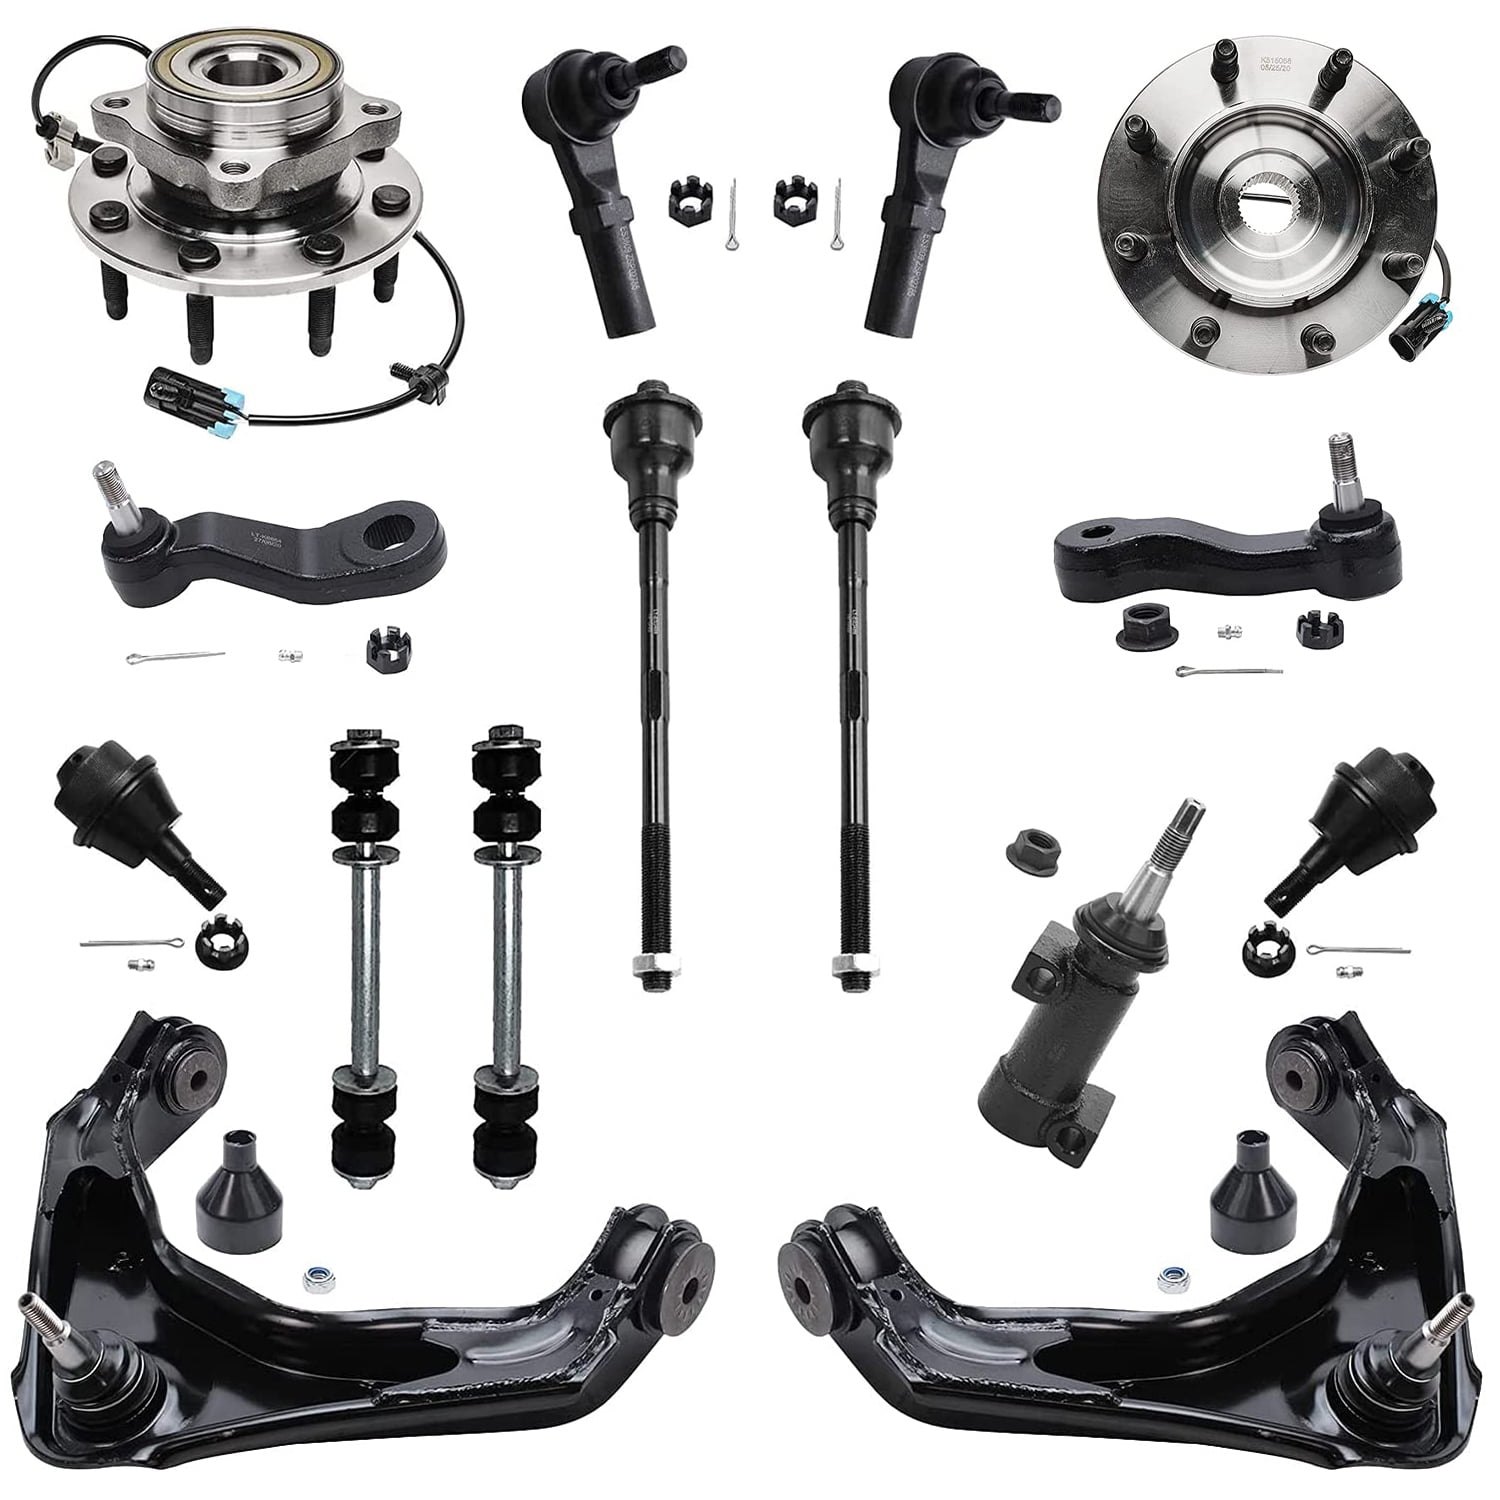 Detroit Axle Front Upper Control Arms; Lower Ball Joints, Pitman Arm,  Idler Arm ＆ Sway Bar Links for Chevrolet GMC Avalanche Silverado Suburban  Sie